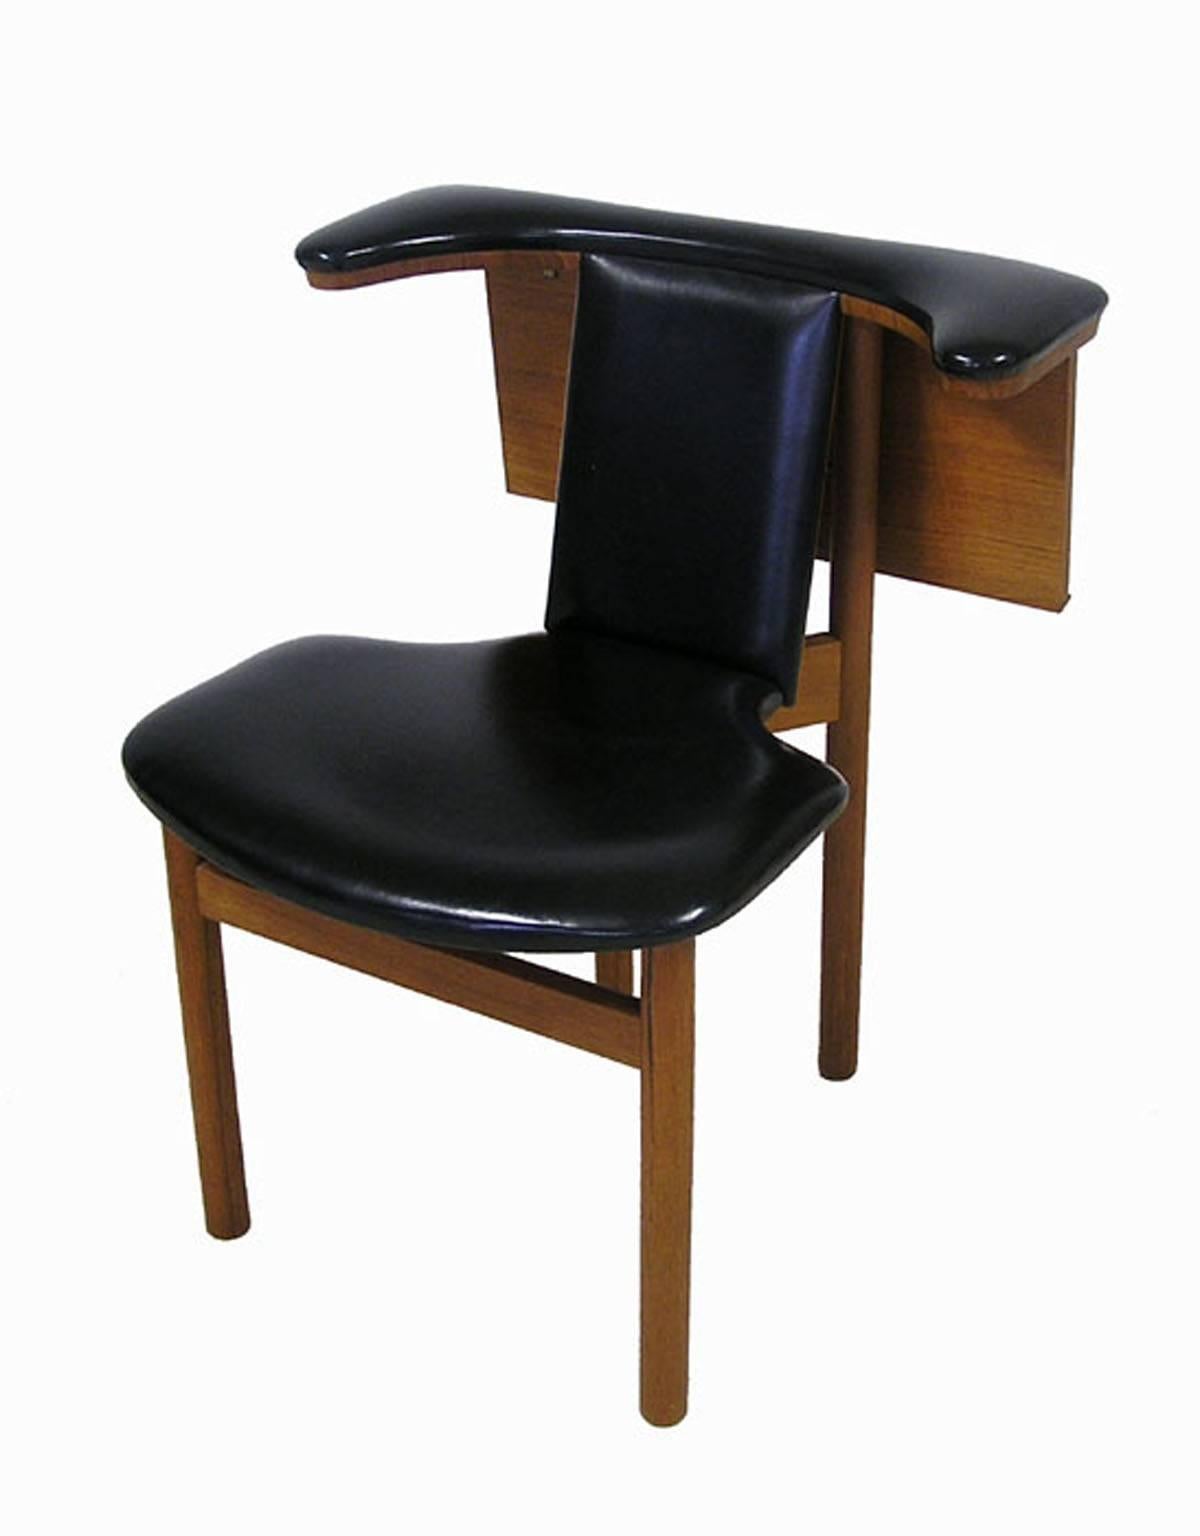 A rare multifunctional chair from the 1950s Danish modern era uniquely crafted to facilitate both forward and reverse use. Designed by Hans Olsen and referred to as the 